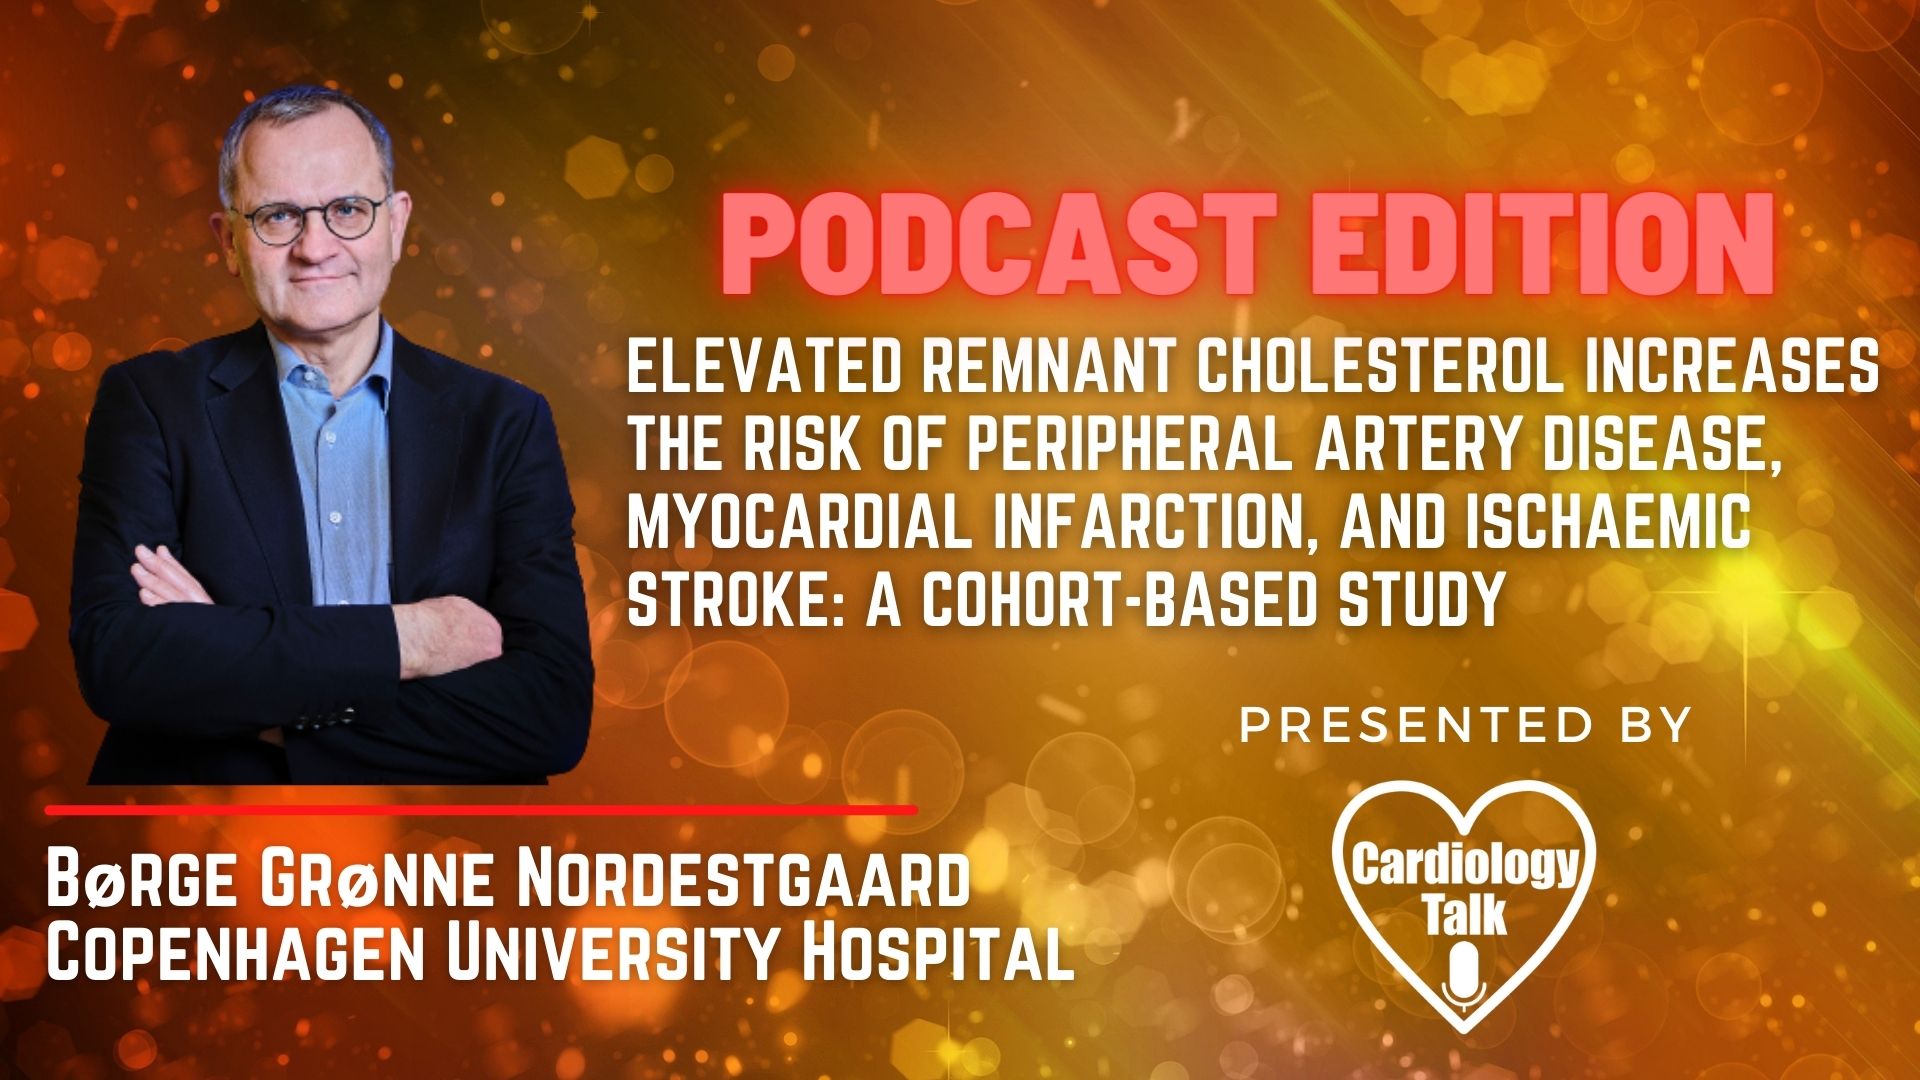 Podcast- Børge Grønne Nordestgaard, MD- Elevated remnant cholesterol increases the risk of peripheral artery disease, myocardial infarction, and ischaemic stroke: a cohort-based study- ...